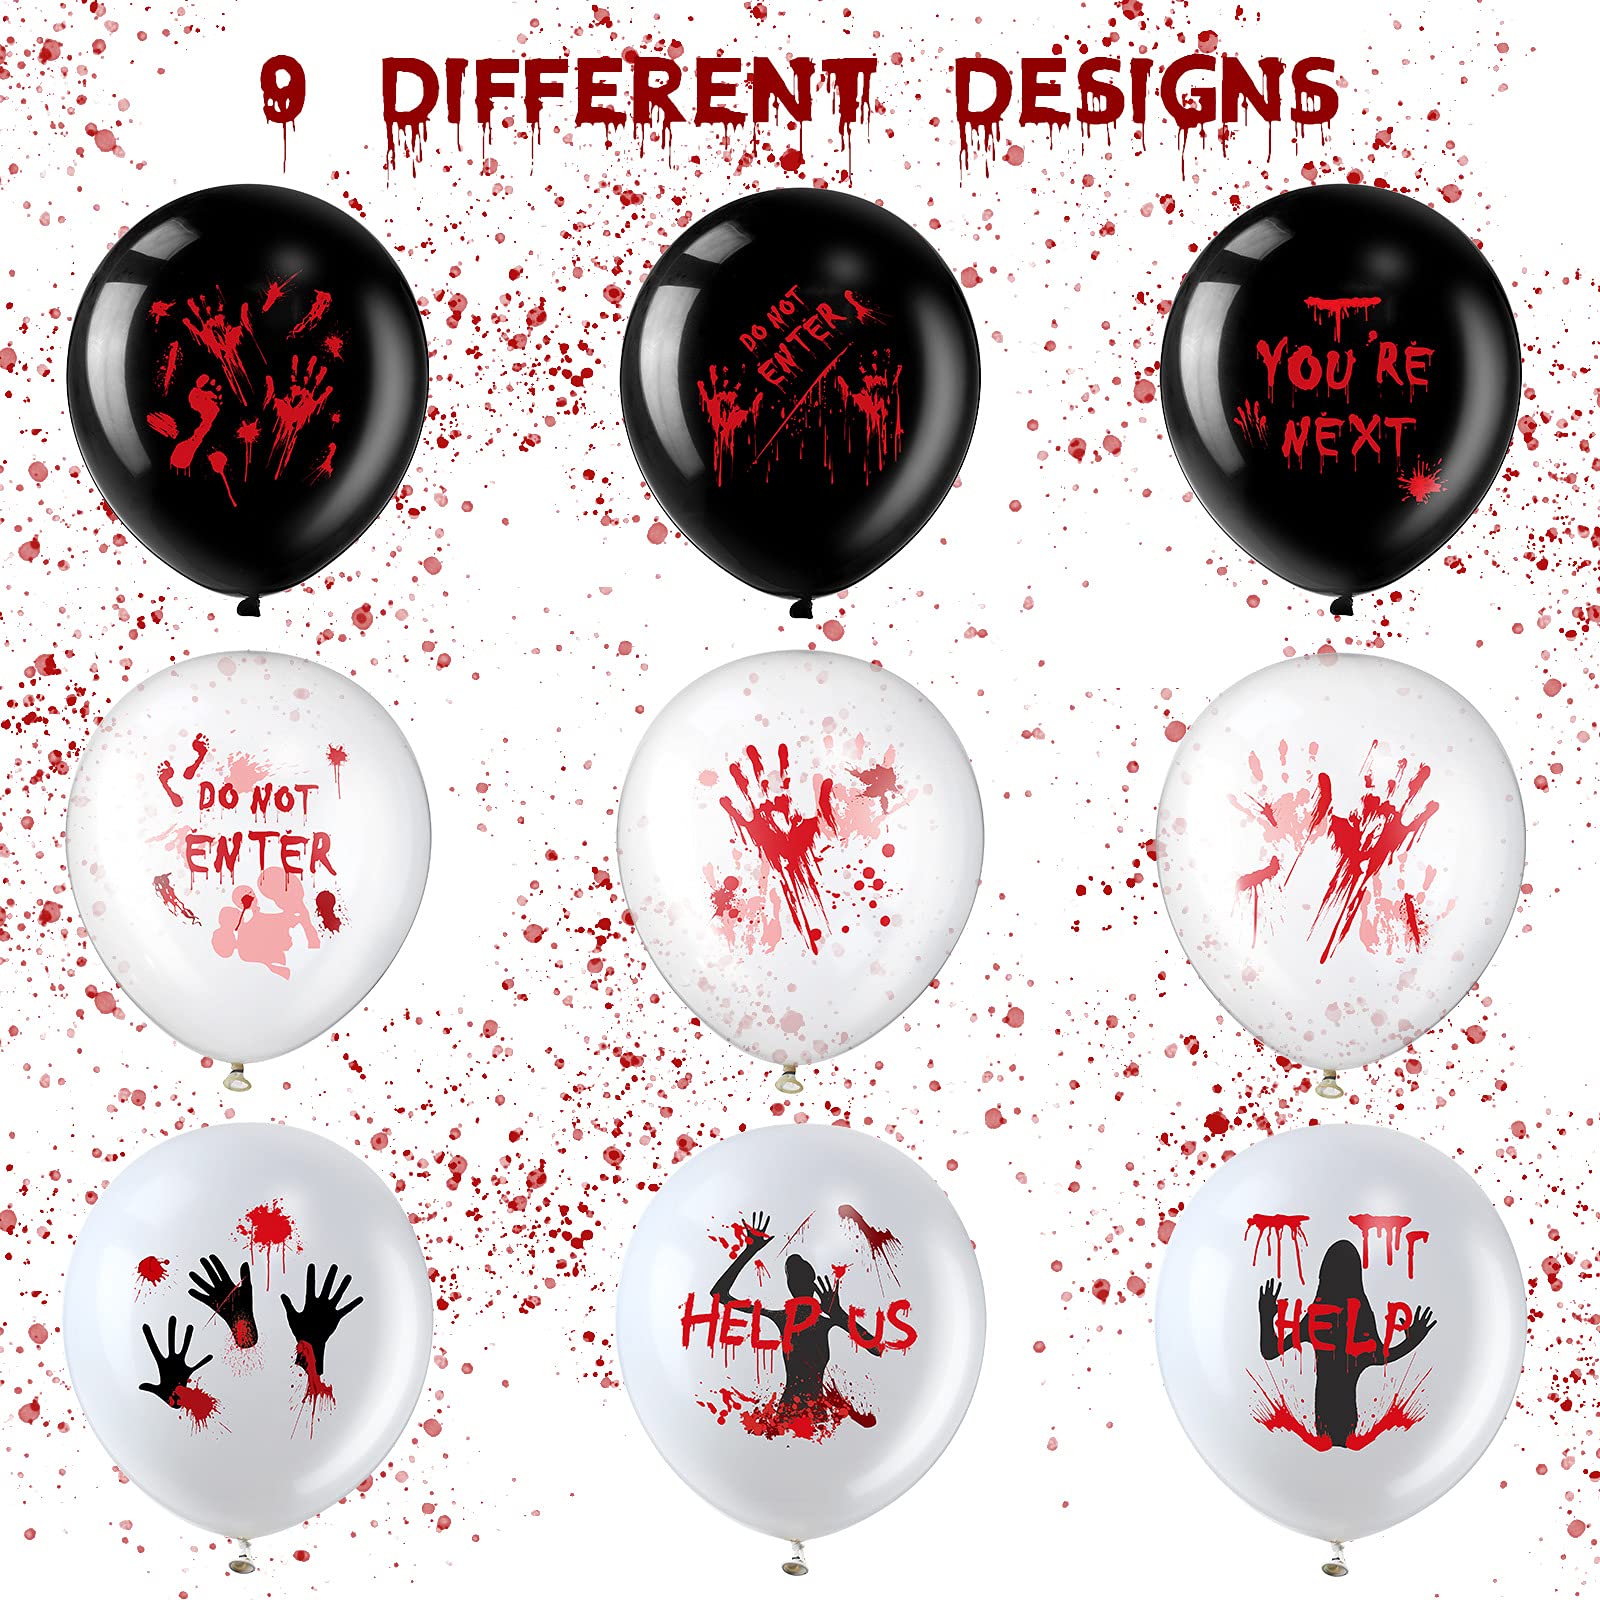 45 Pcs Scary Halloween Balloons 12 Inches Bloody Balloons Eye Blood Splatter Decorations Horror Balloons Zombie Latex Balloons for Birthday Vampire Haunted House Party Supplies (Scared Style)